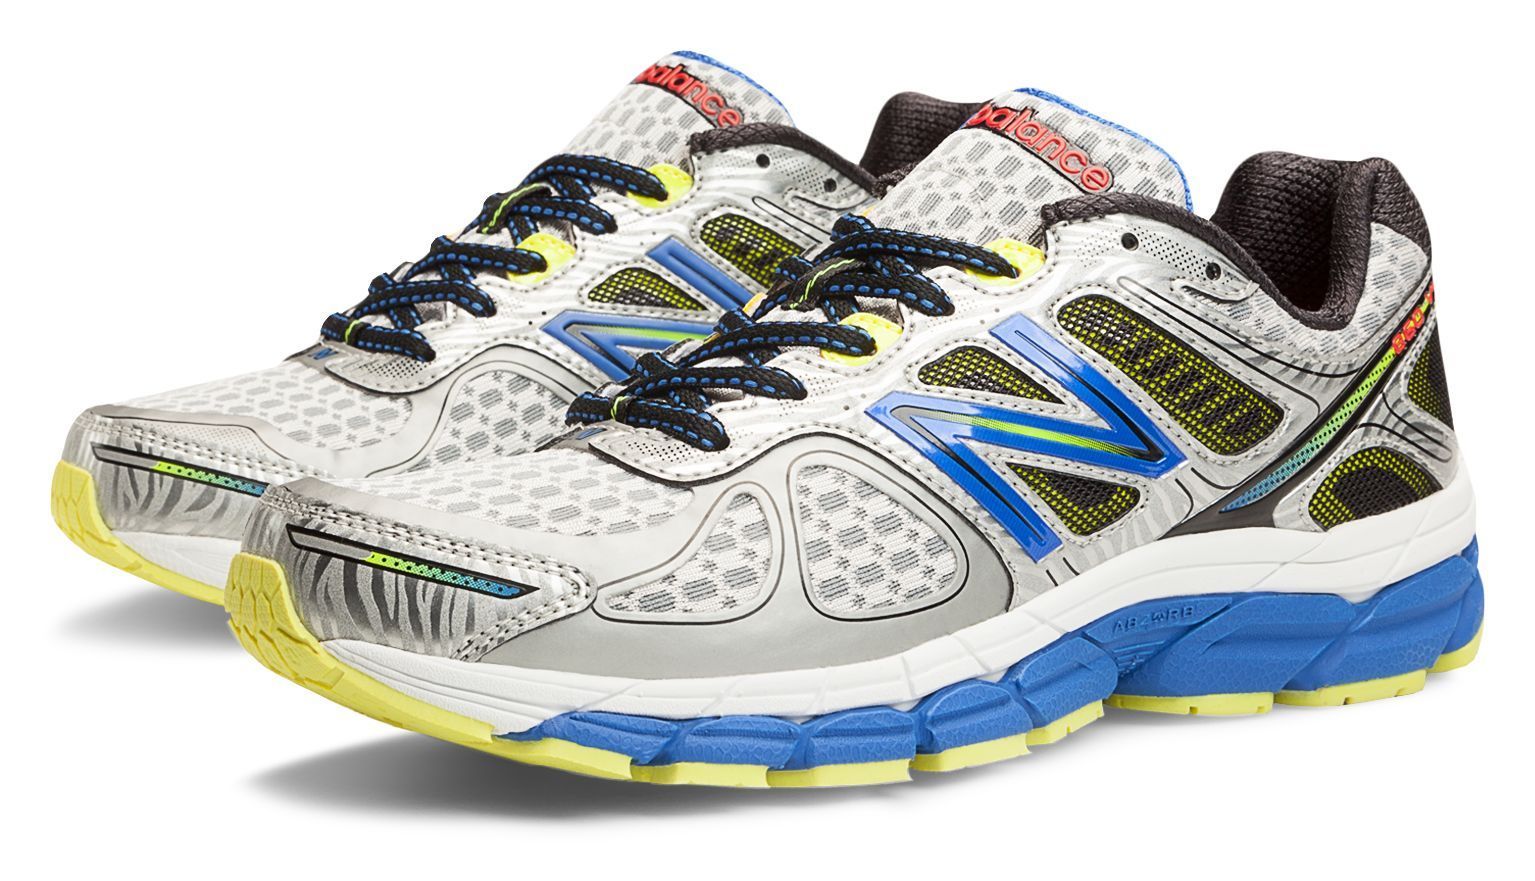 New Balance men’s 860v4 stability running shoes for $35, free shipping